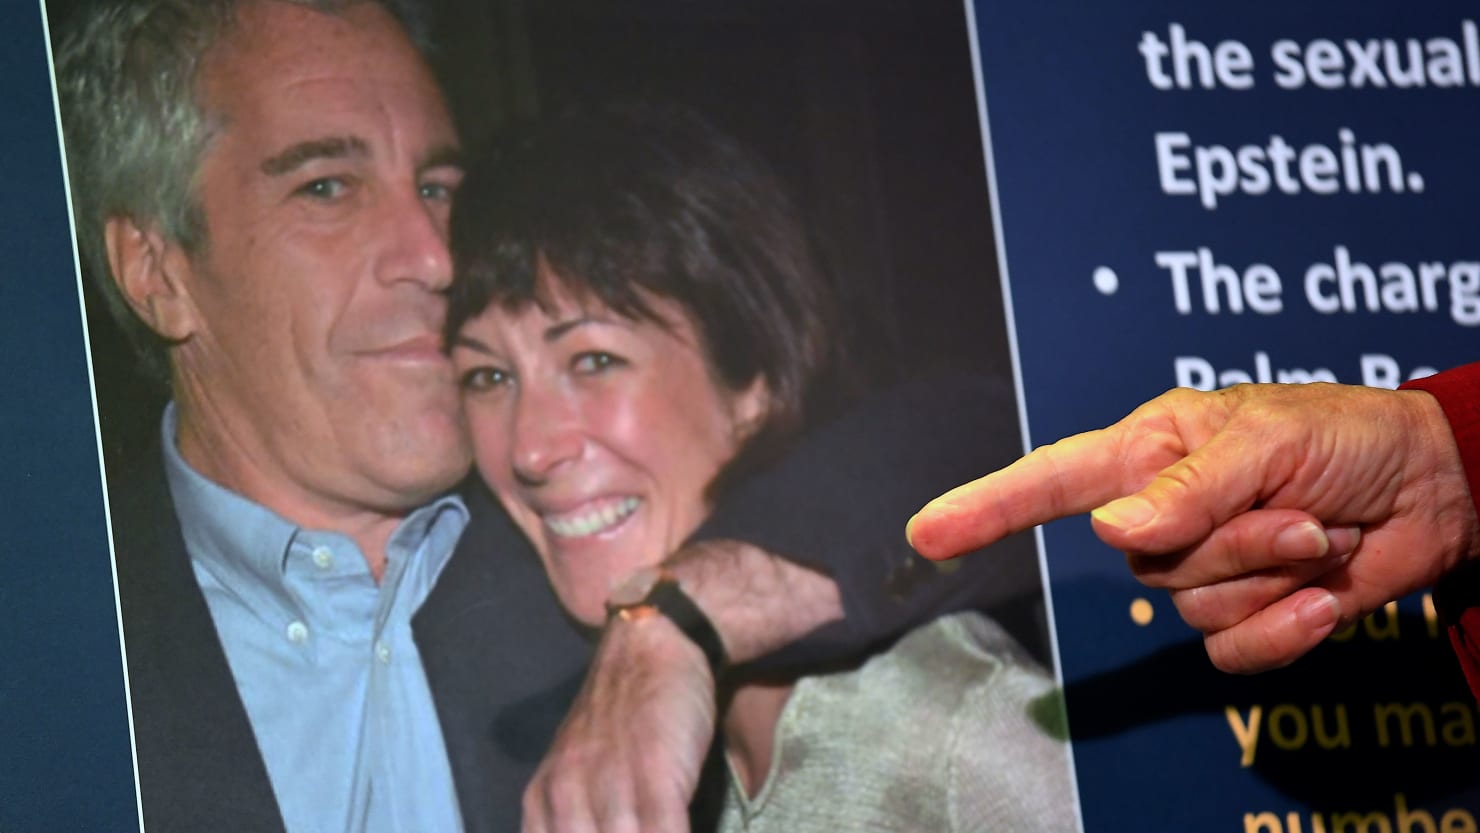 Madame Ghislaine Maxwell, accused of Jeffrey Epstein, sells house in London to pay legal fees